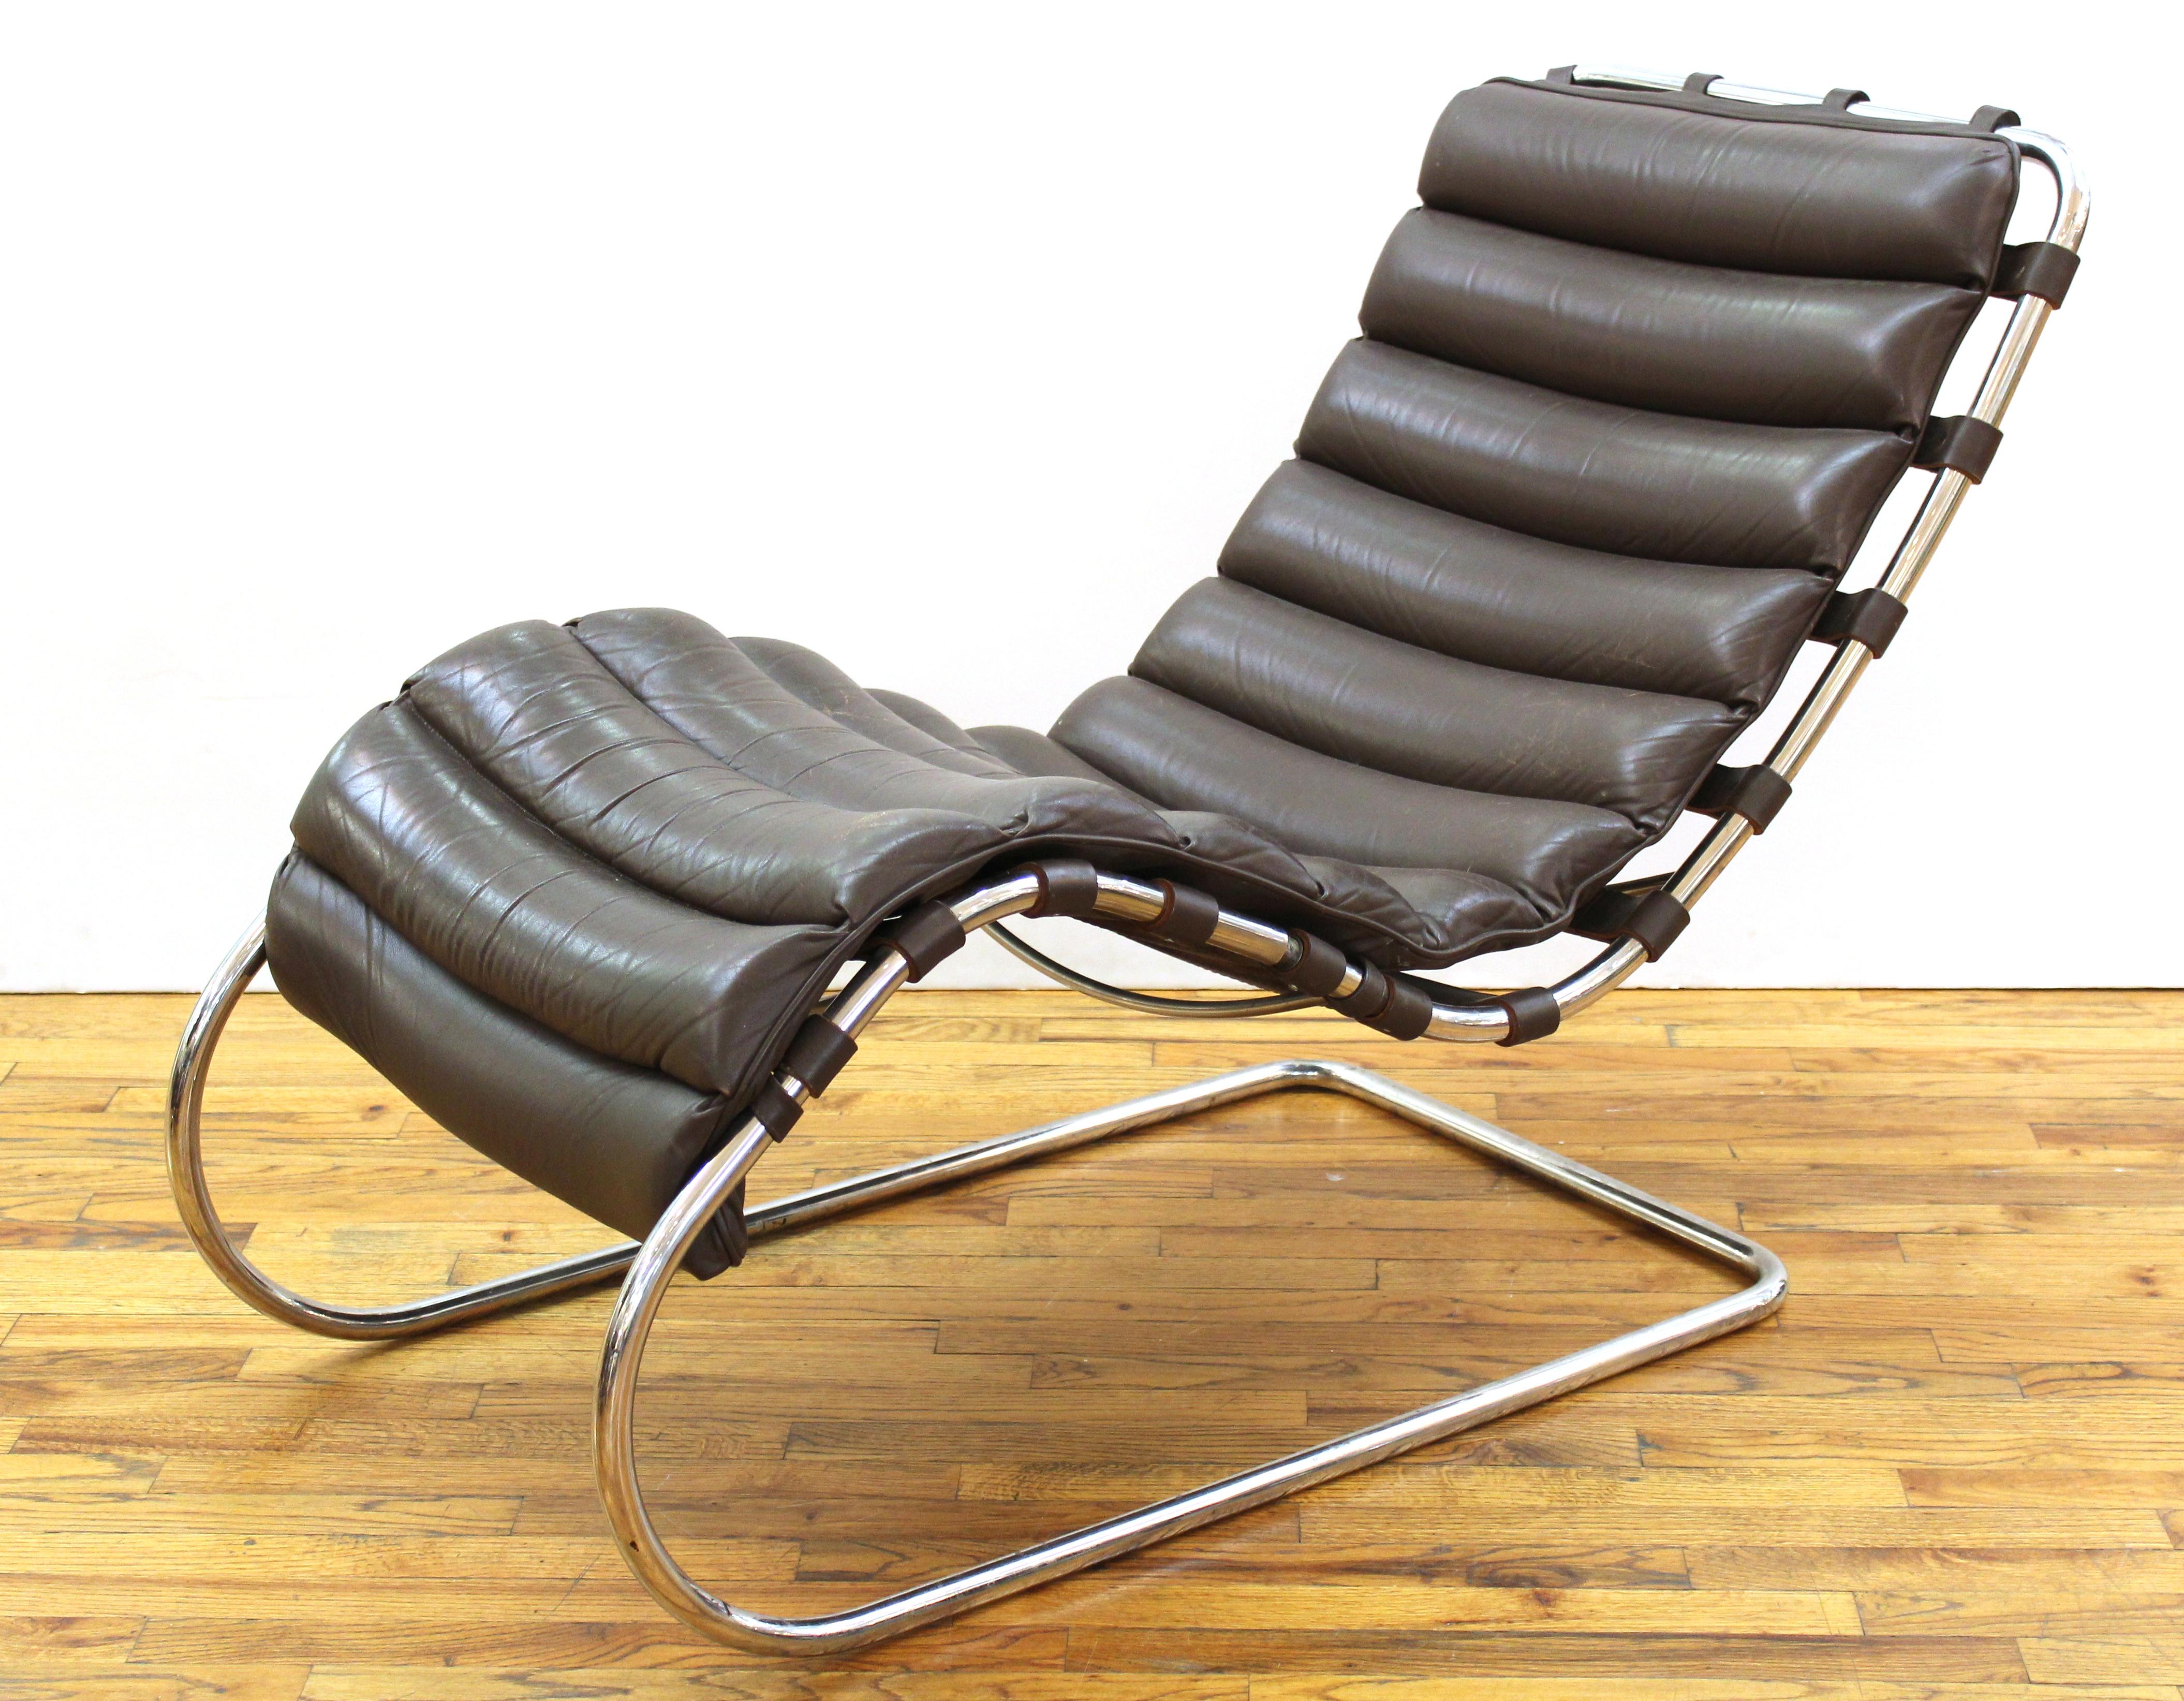 Mies van der Rohe for Knoll MR chaise lounge 241LS with cantilevered tubular chromed steel frame and upholstered in brown leather. Originally designed in 1927 and used in Stuttgart, Germany. Marked 'Knoll Studio' on the back frame.